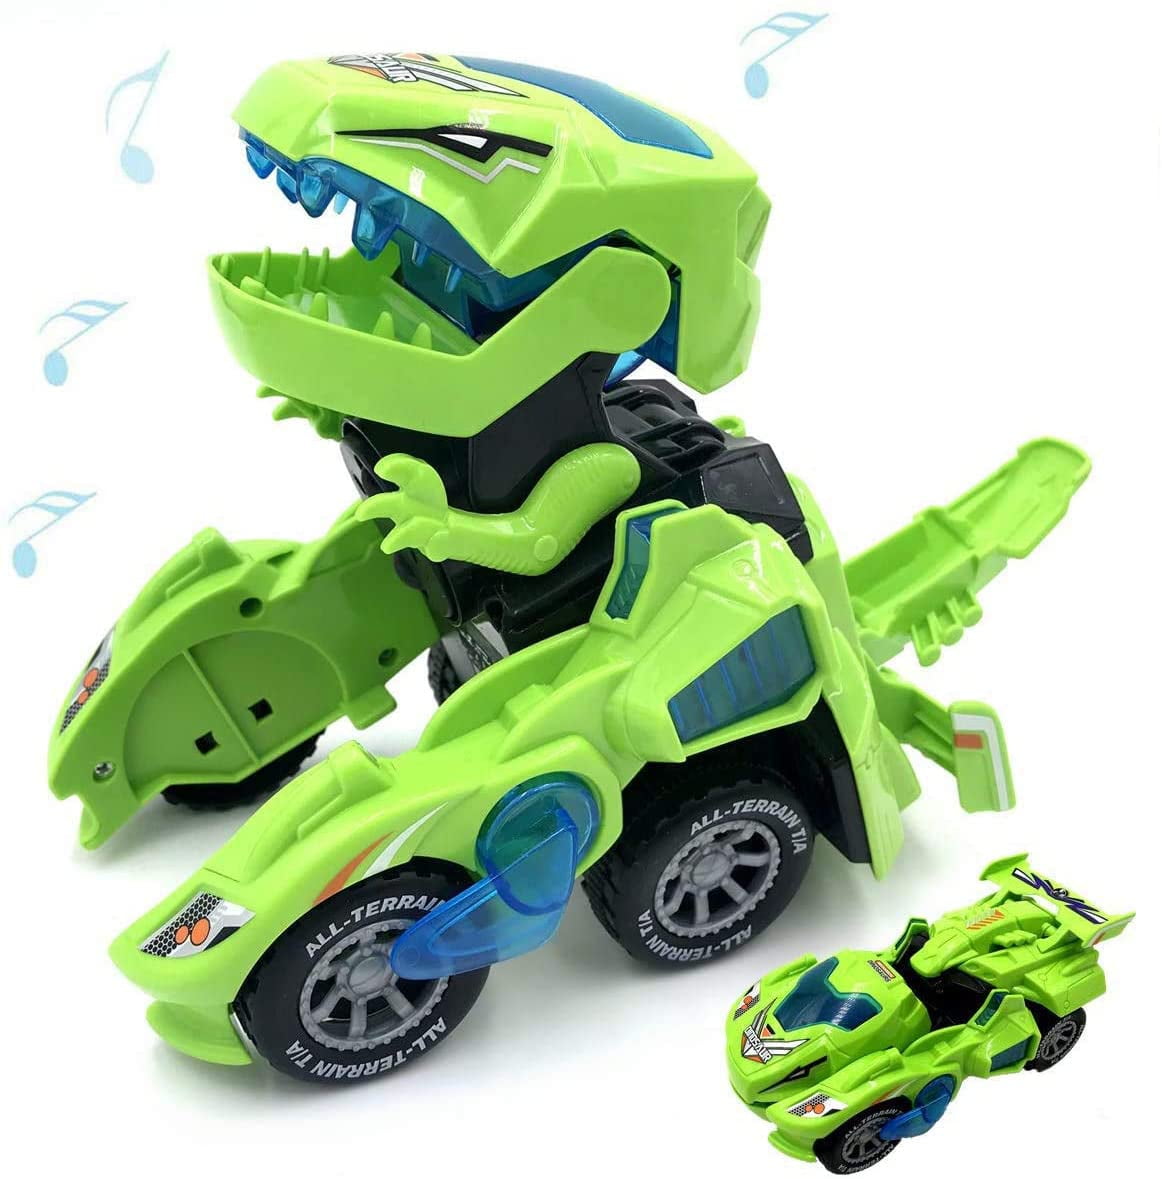 Random, 1 Olleasily Kids Dinosaur Car Toys Transforming Dinosaur LED Car with Light Sound Kids Toy Gift for 2-8 Year Old Boys Girls Toddlers Kids Christmas Birthday Gifts 